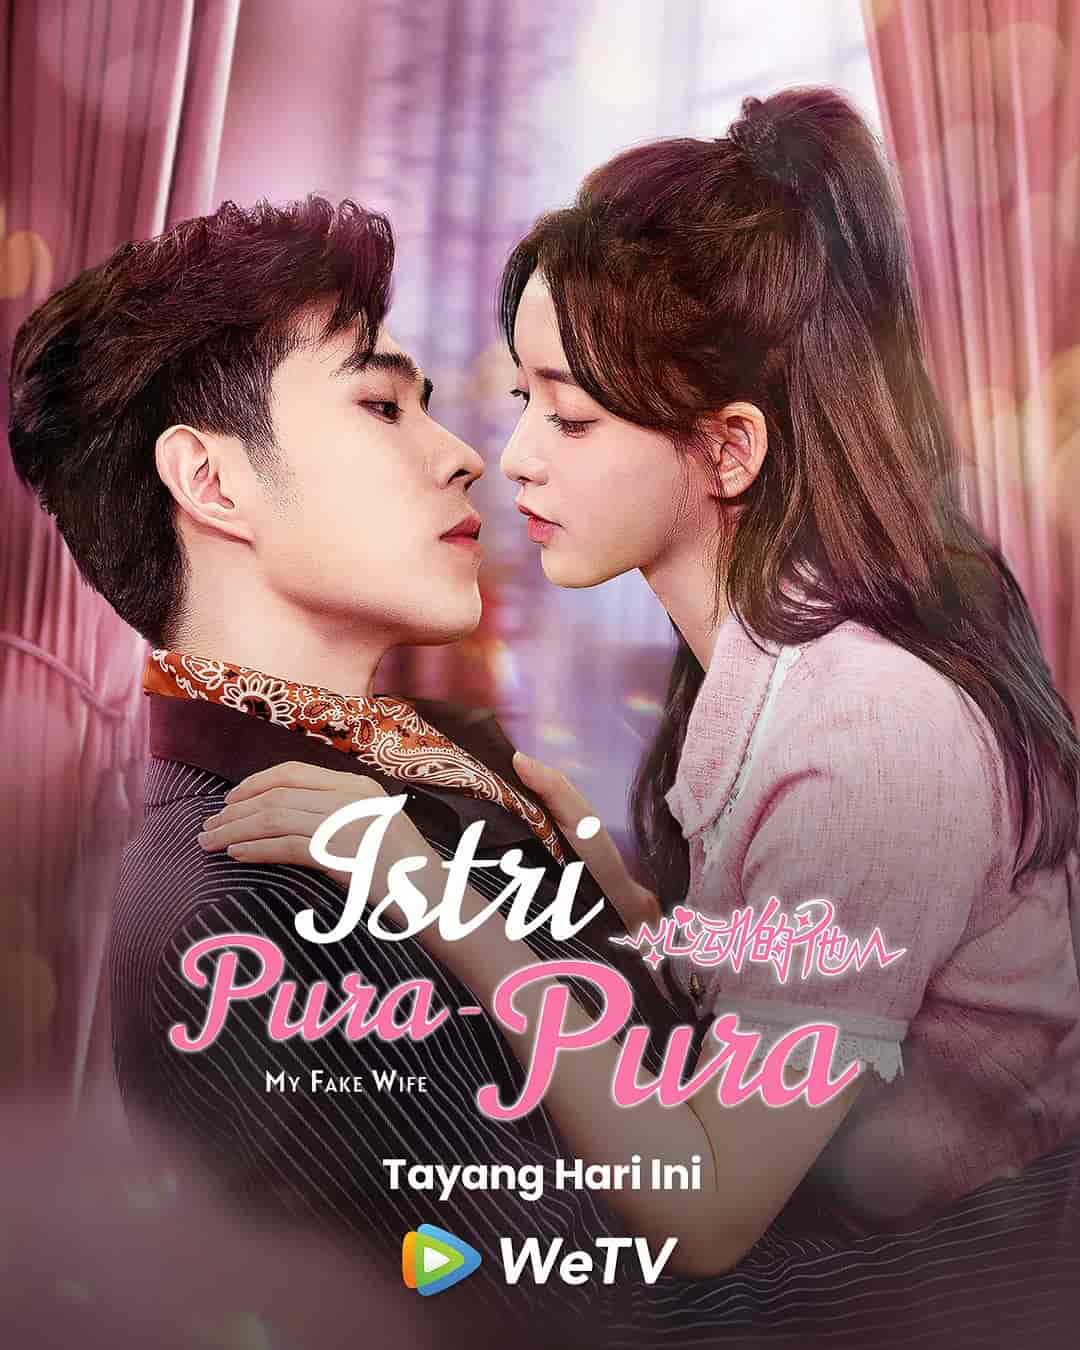 My Fake Wife - Sinopsis, Pemain, OST, Episode, Review